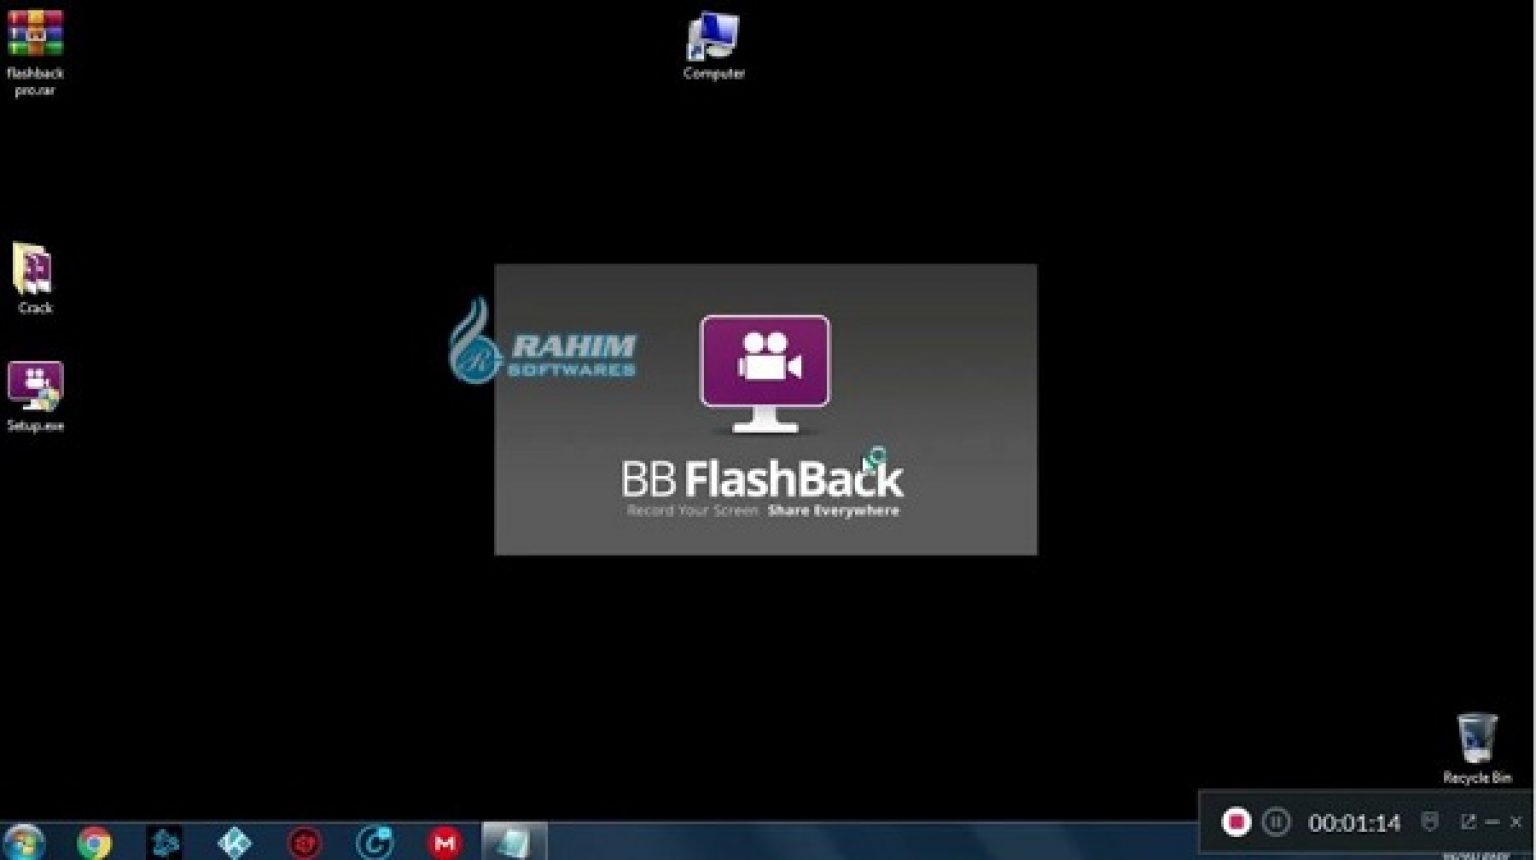 BB FlashBack Pro 5.60.0.4813 instal the last version for ipod